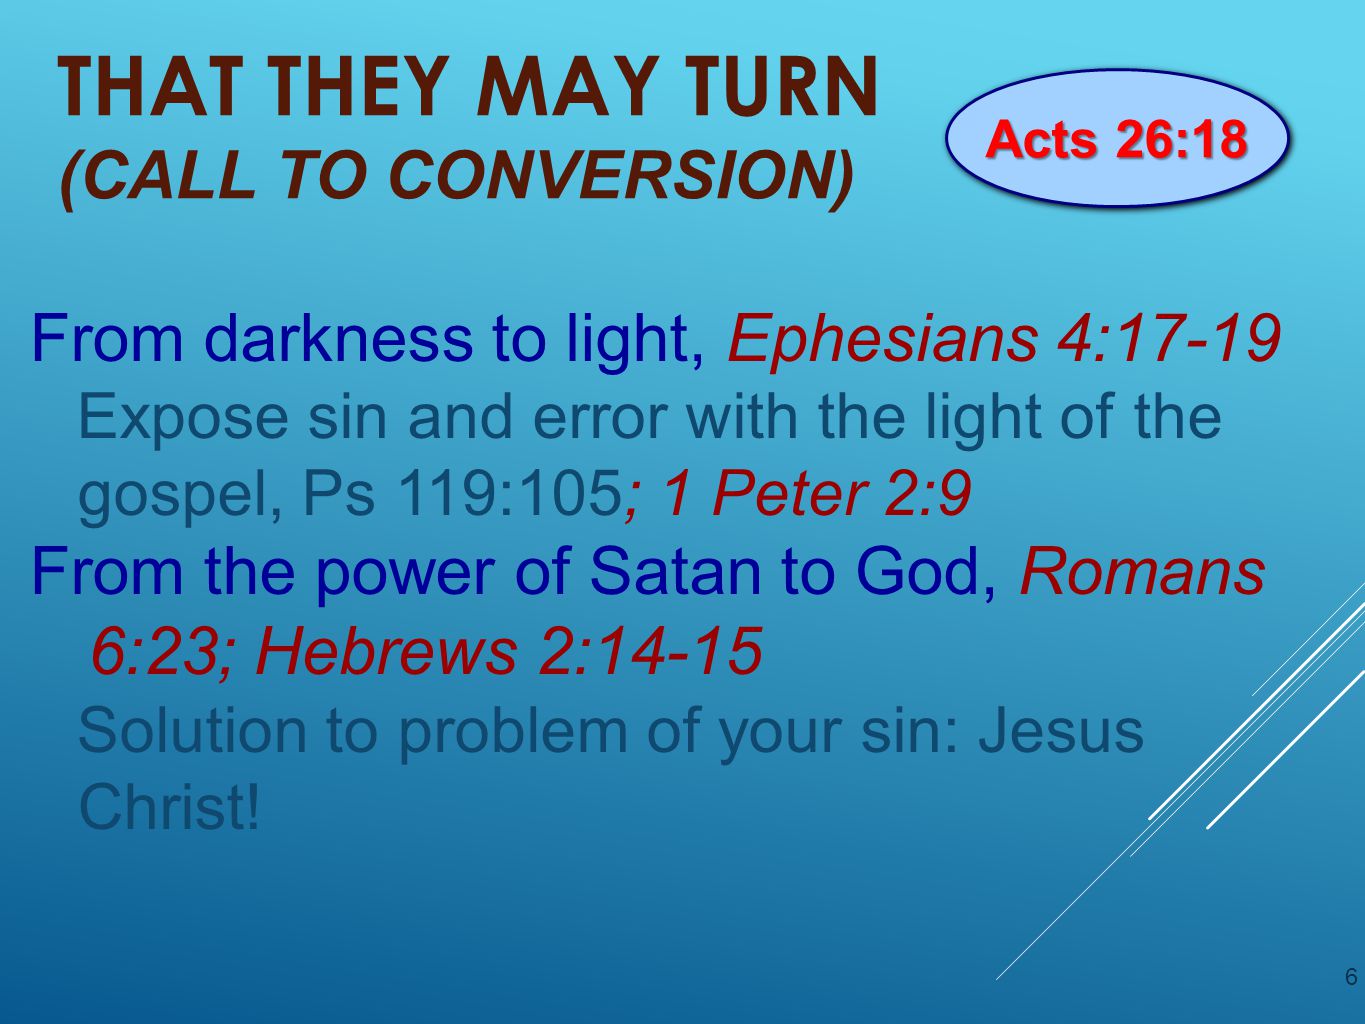 THAT THEY MAY TURN (CALL TO CONVERSION) From darkness to light, Ephesians 4:17-19 Expose sin and error with the light of the gospel, Ps 119:105; 1 Peter 2:9 From the power of Satan to God, Romans 6:23; Hebrews 2:14-15 Solution to problem of your sin: Jesus Christ.